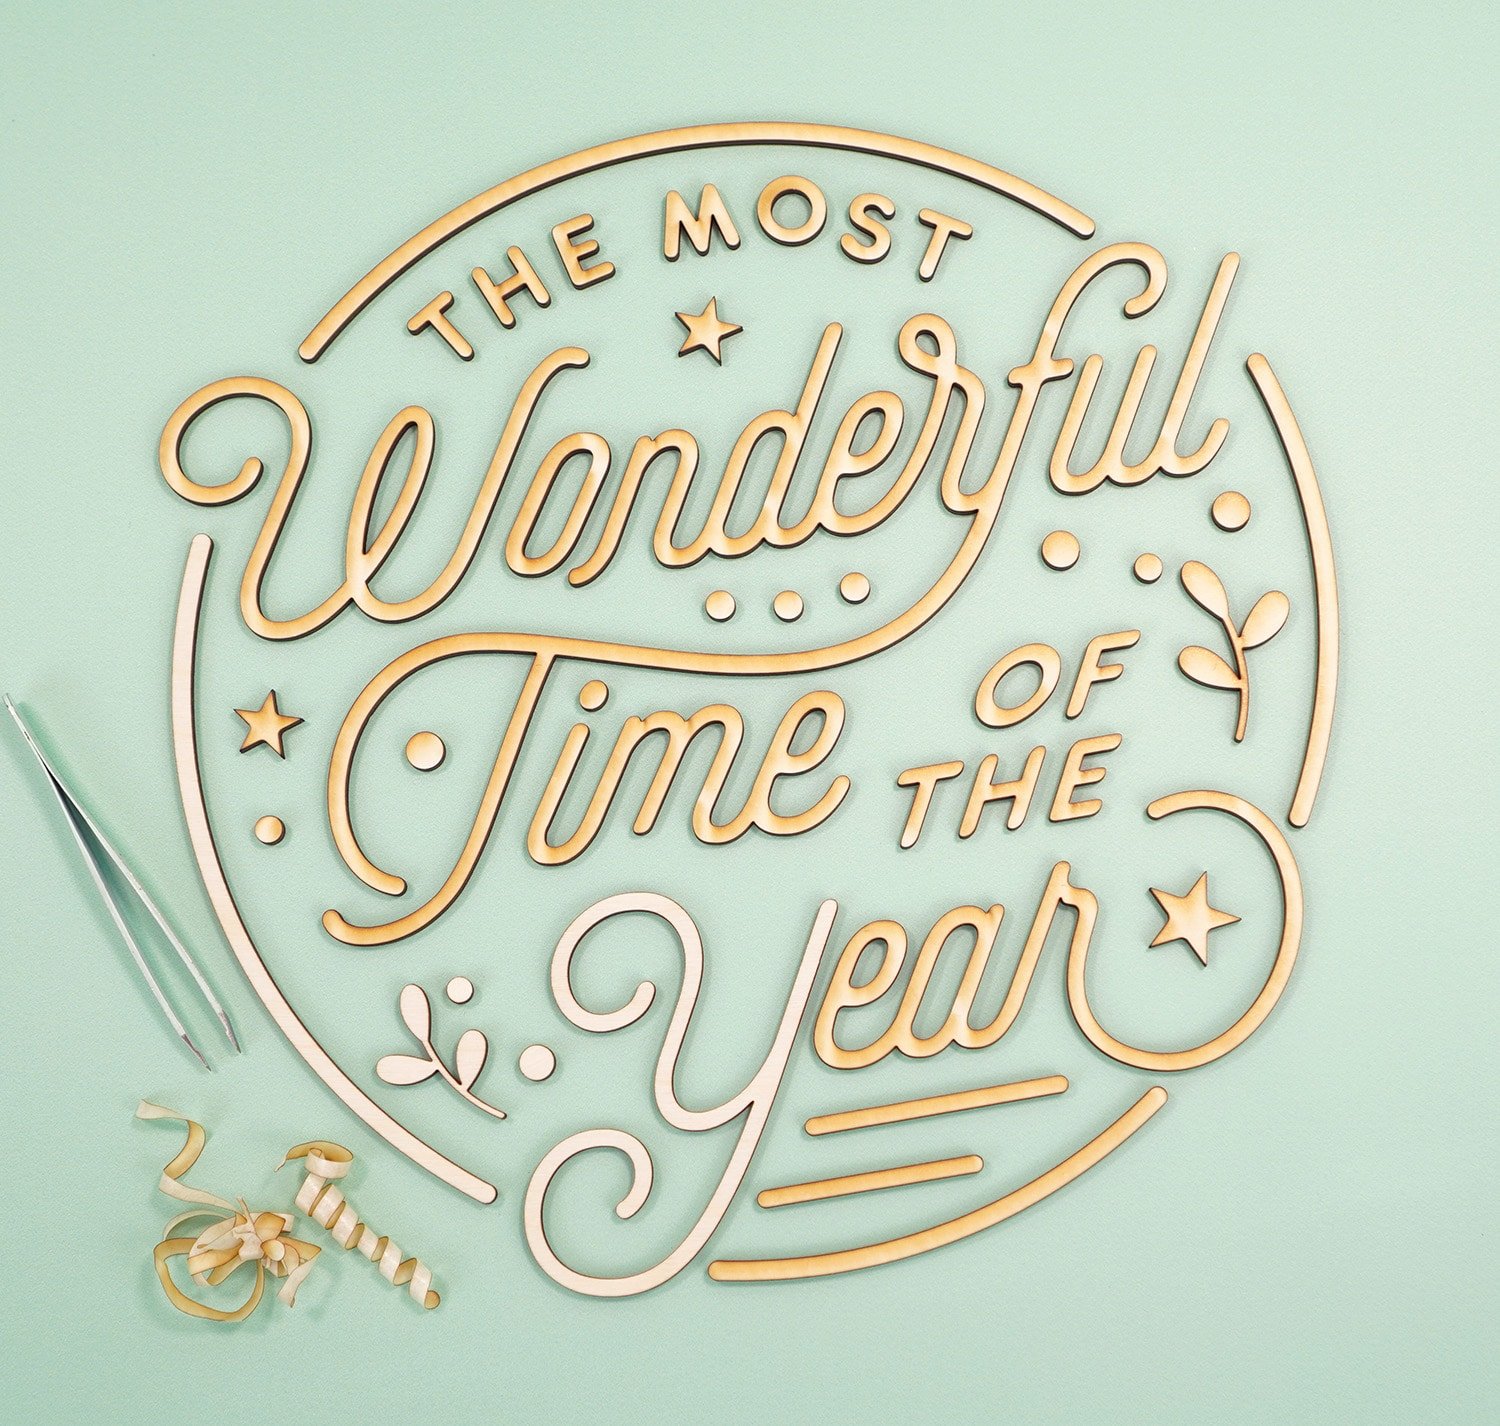 "The Most Wonderful Time of the Year' Laser Cut Wood Sign pieces with tweezers and pile of peeled off masking tape on mint green background